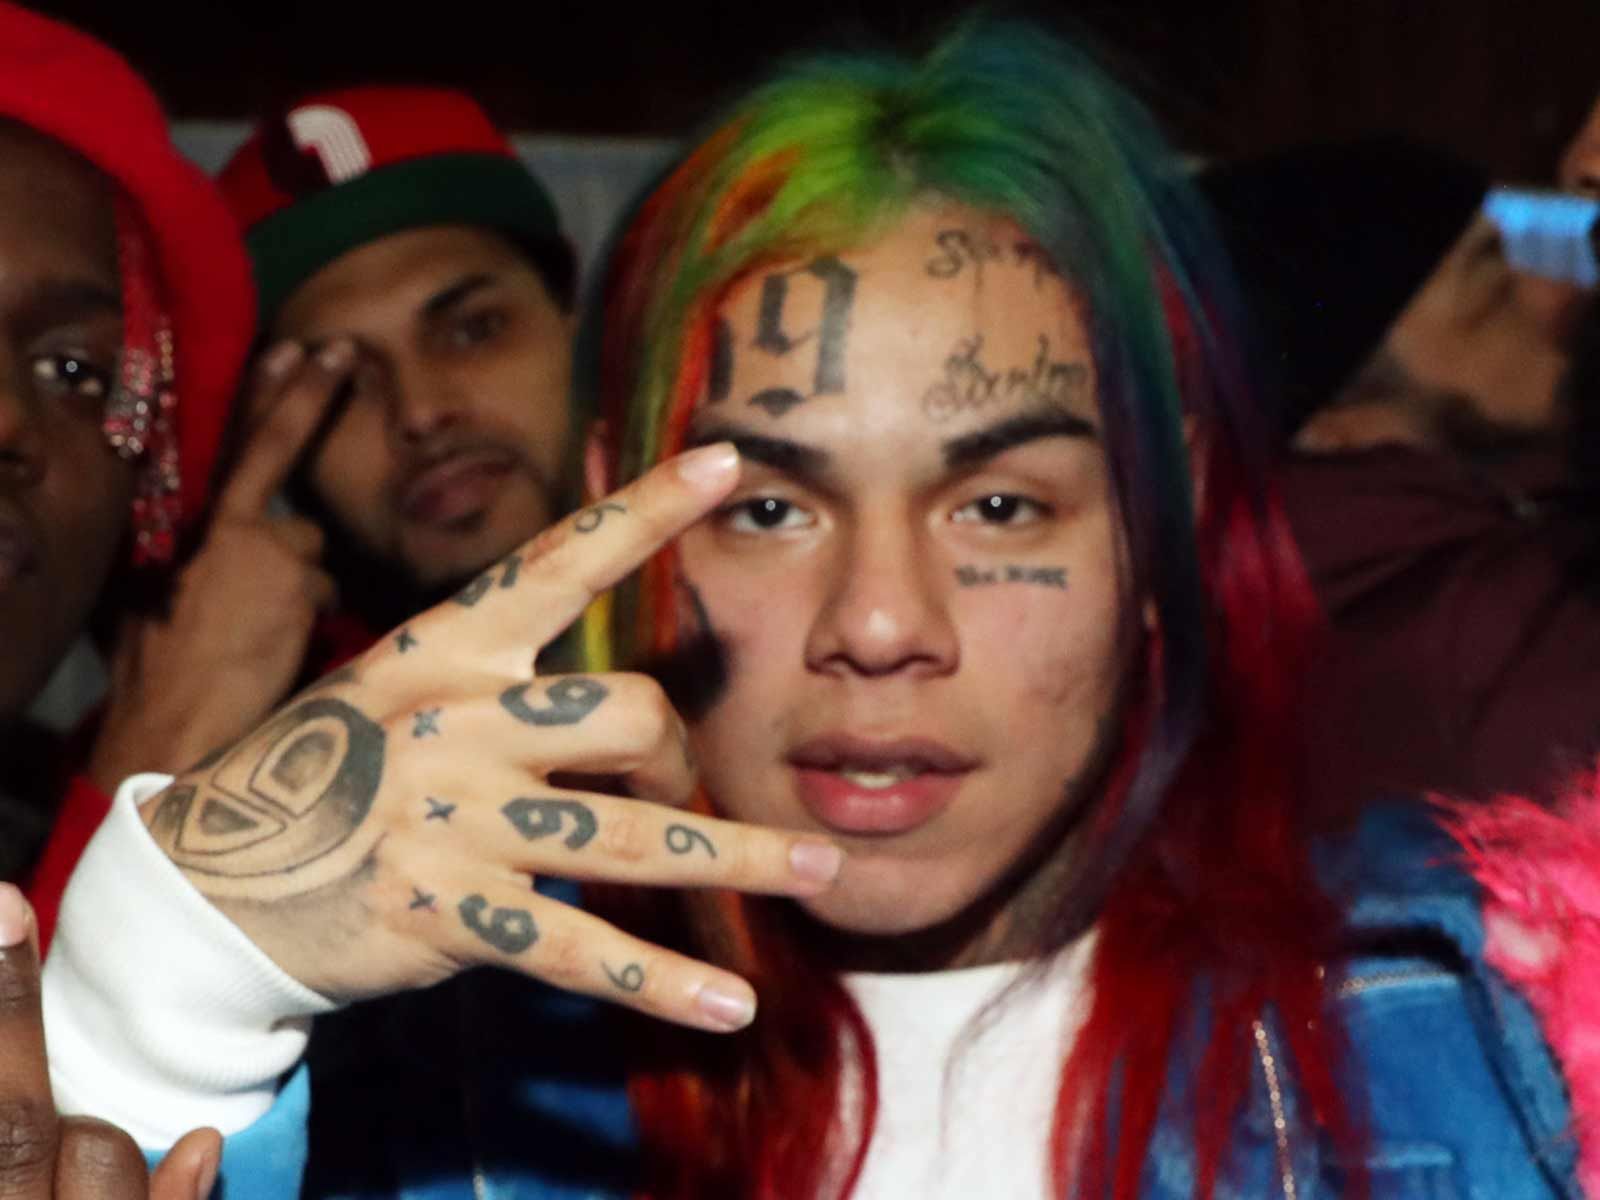 Rapper Tekashi 6ix9ine Is Not in Jail, Despite What He Wants You to Think